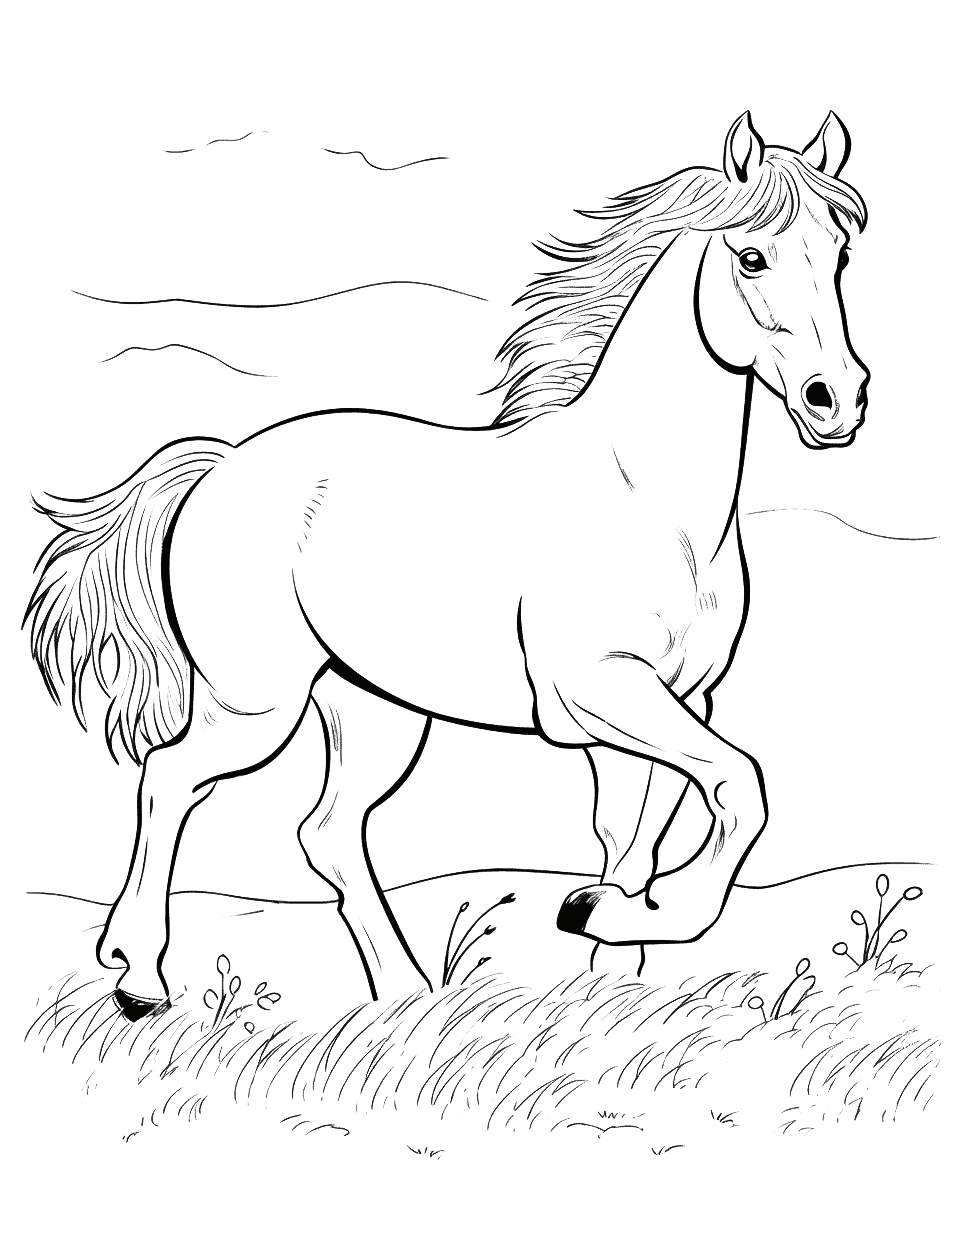 Mustang in the Wild Coloring Page - A dynamic scene of a wild Mustang horse running in a desert landscape.